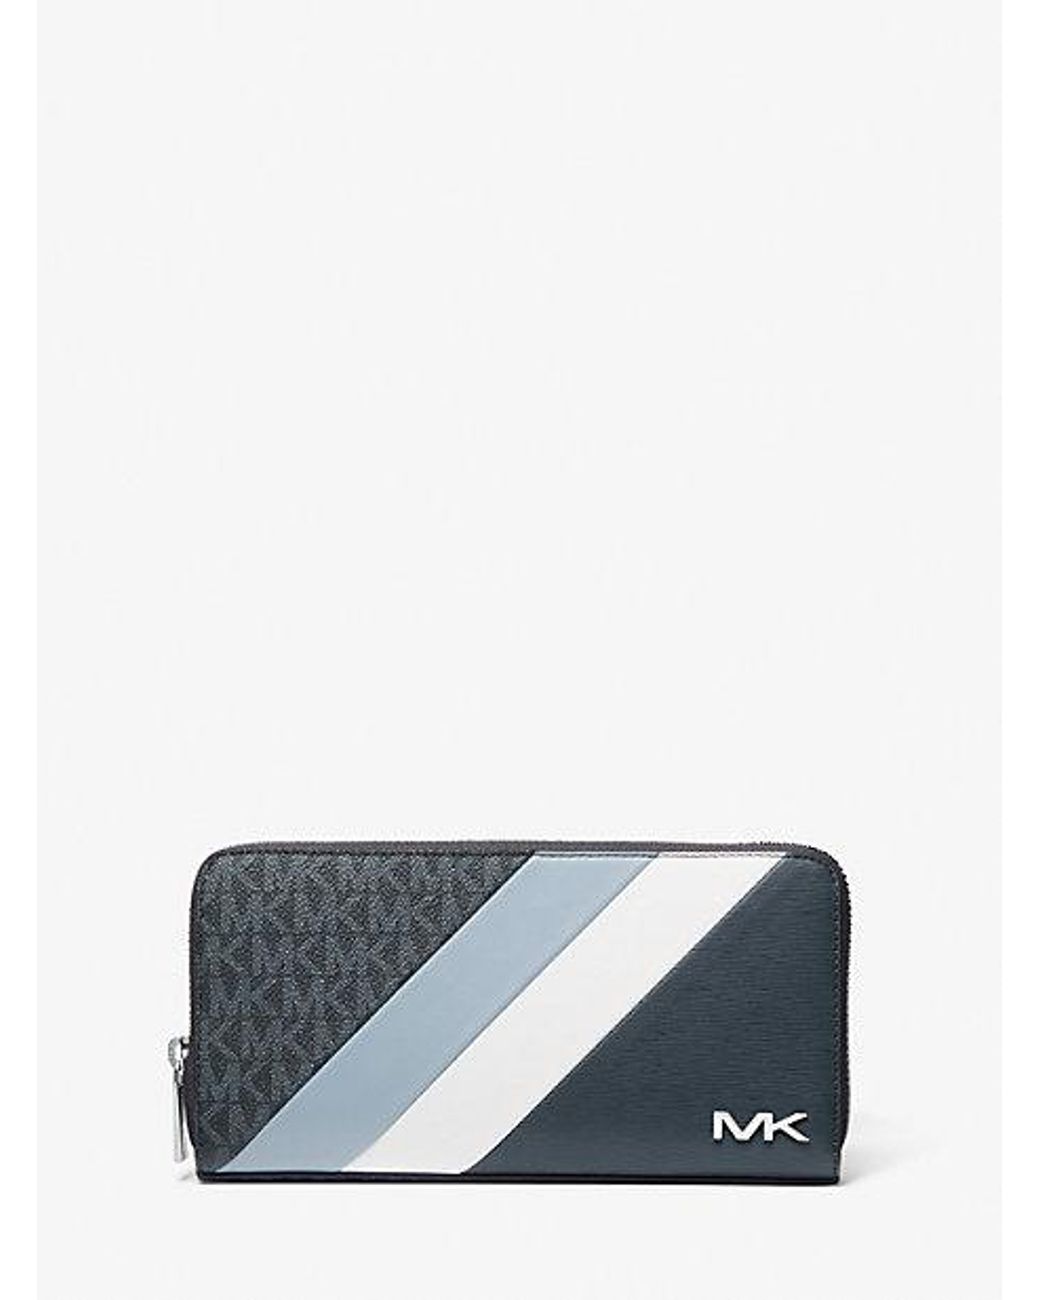 Michael Kors Cooper Logo And Striped Smartphone Wallet in Blue for